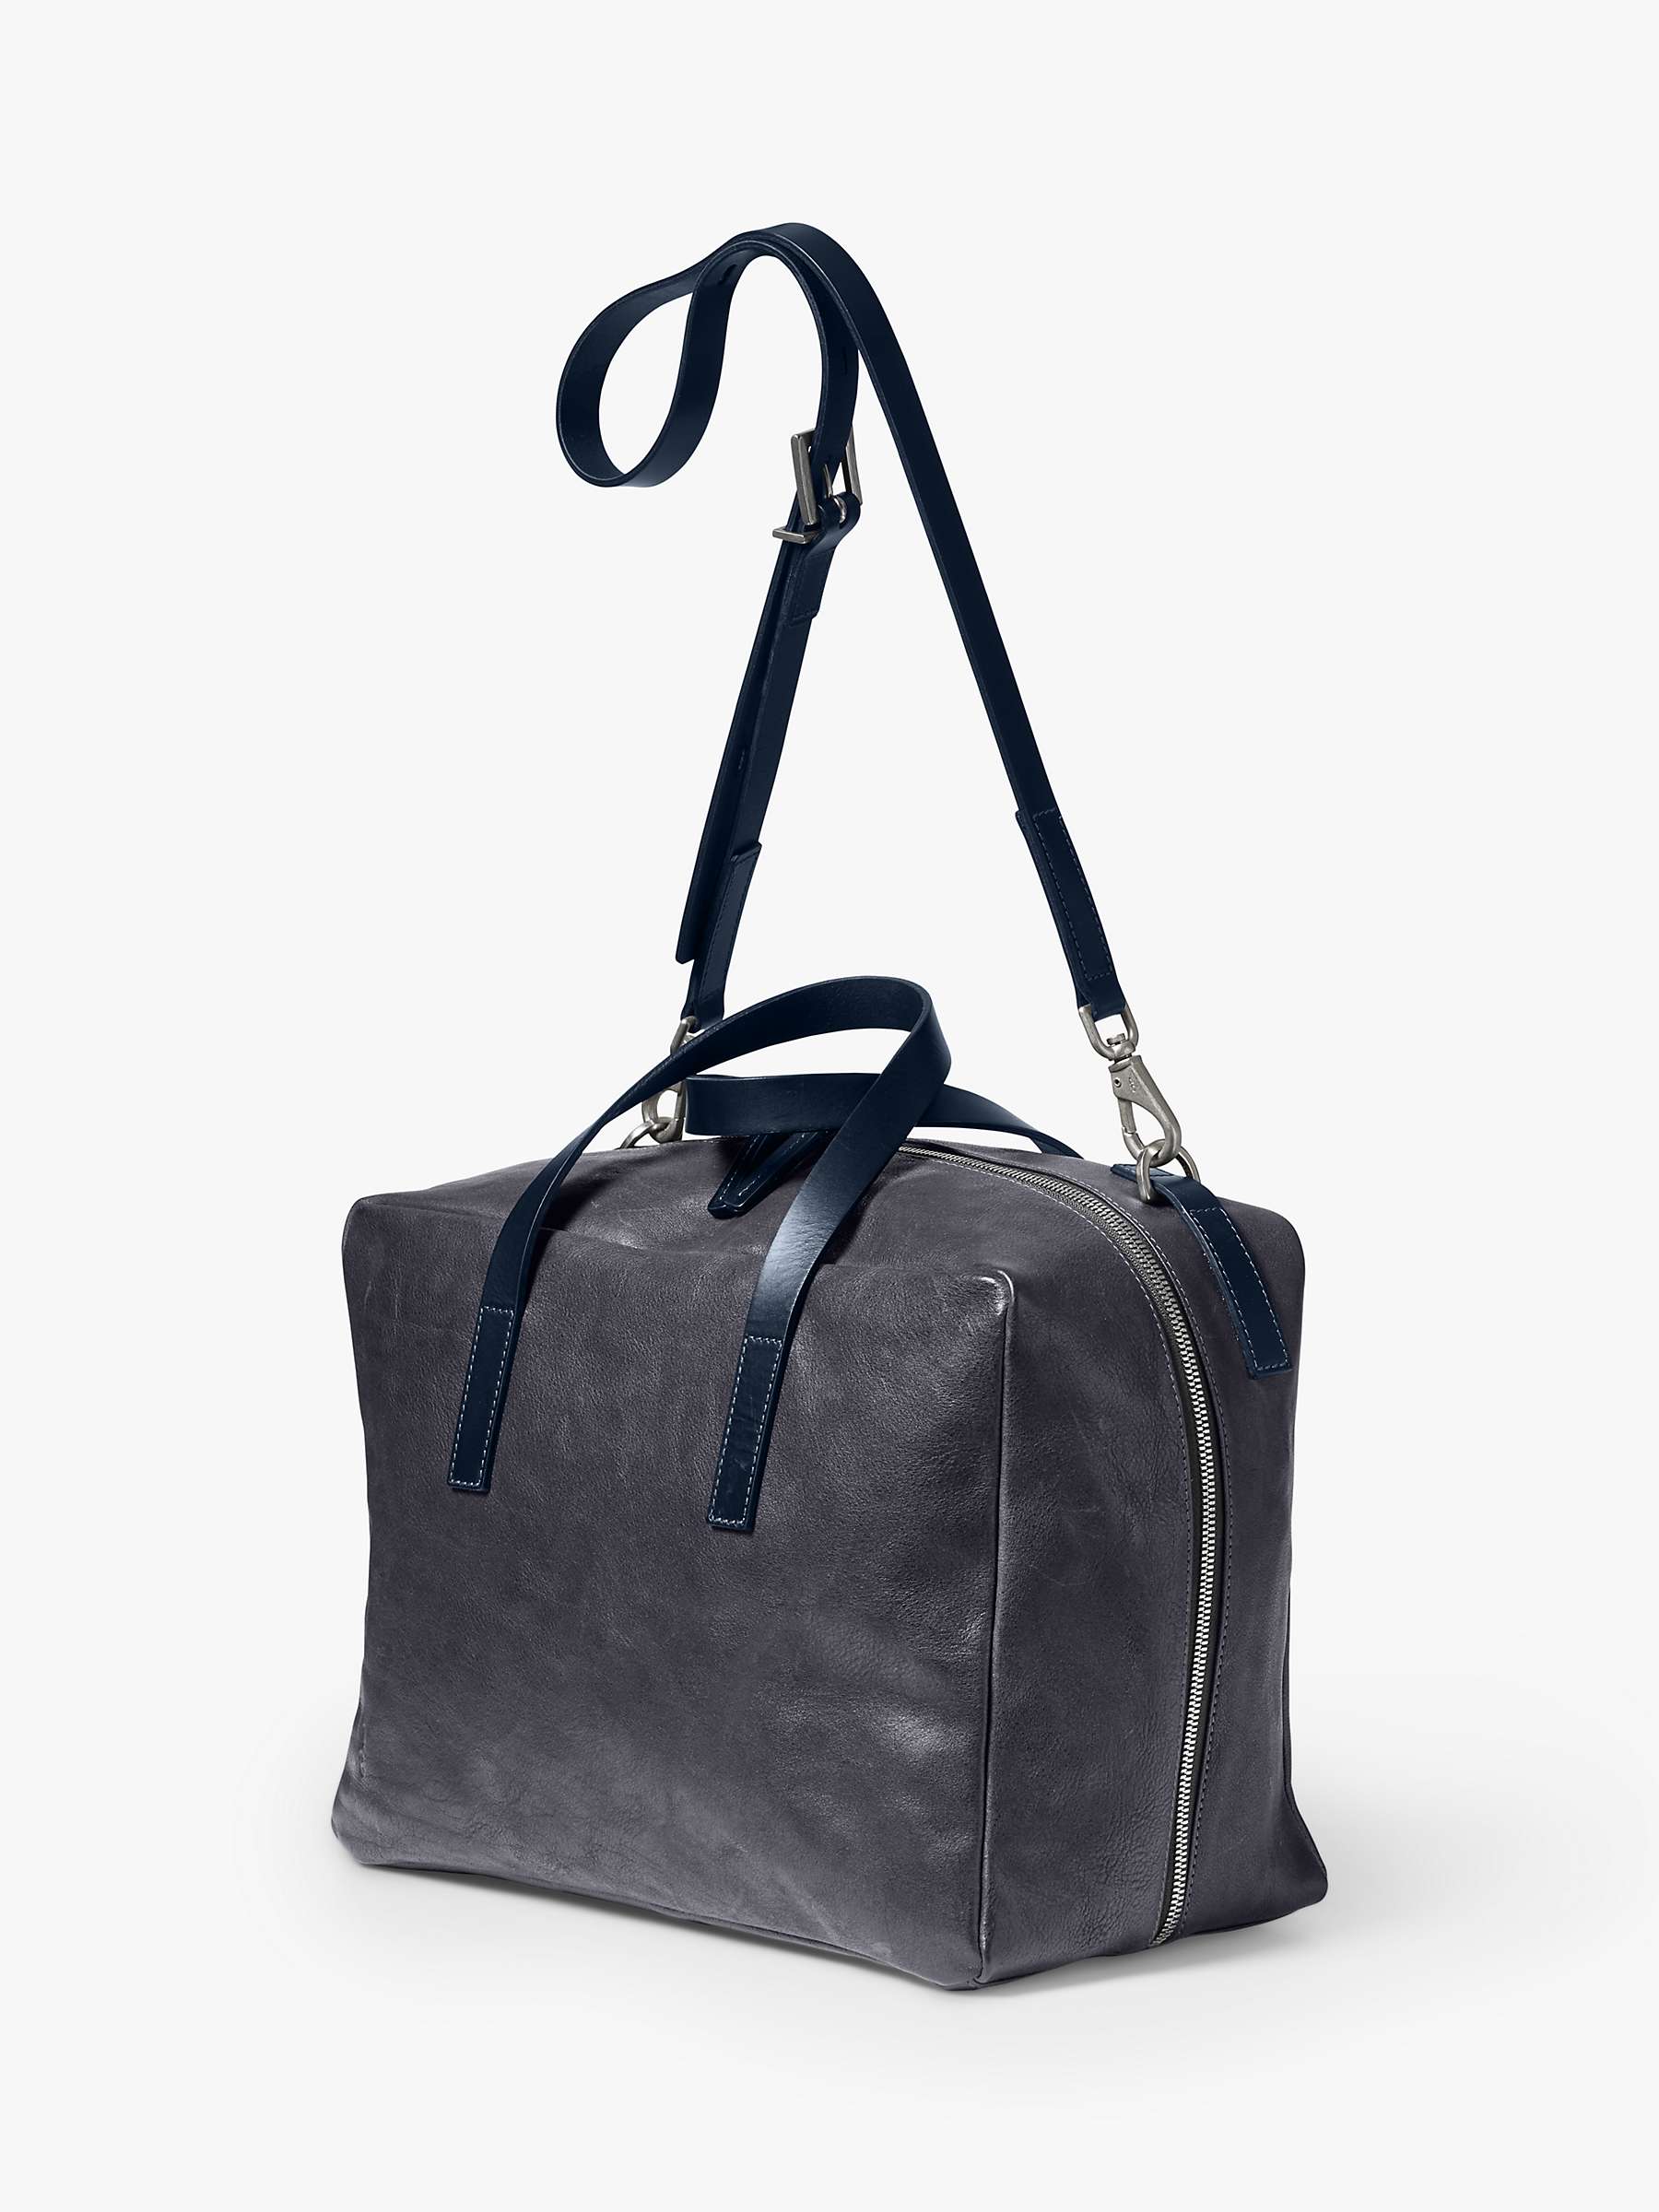 Buy Ally Capellino Jago Bowler Calvert Leather Bowling Bag Online at johnlewis.com